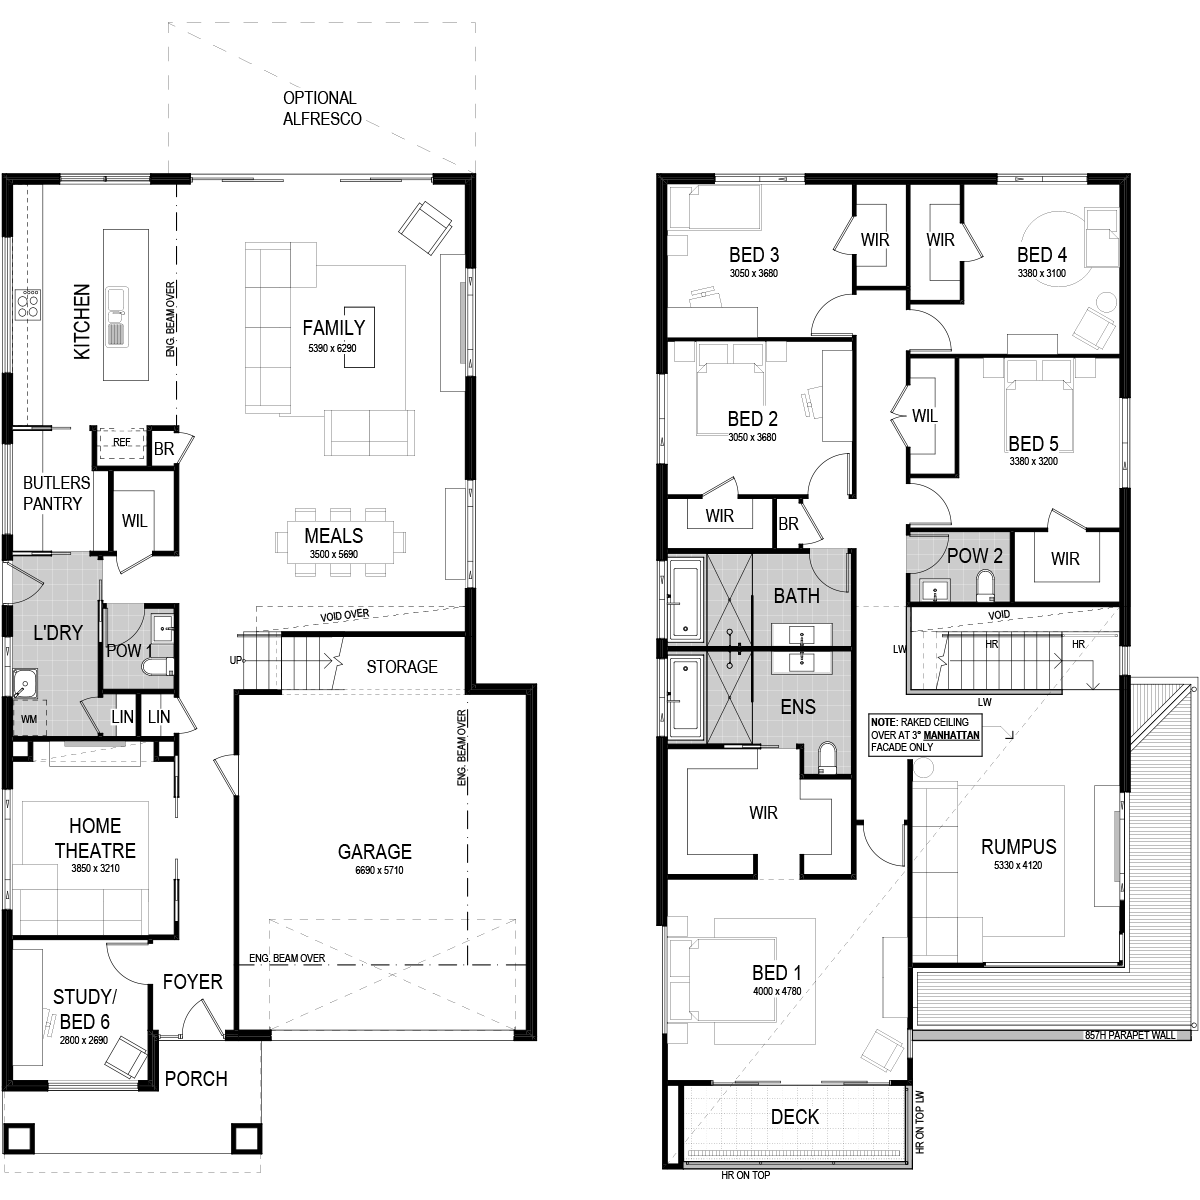 4 Bedroom, 2 Storey House Plans | Montgomery Homes: 25+ Display Homes ...